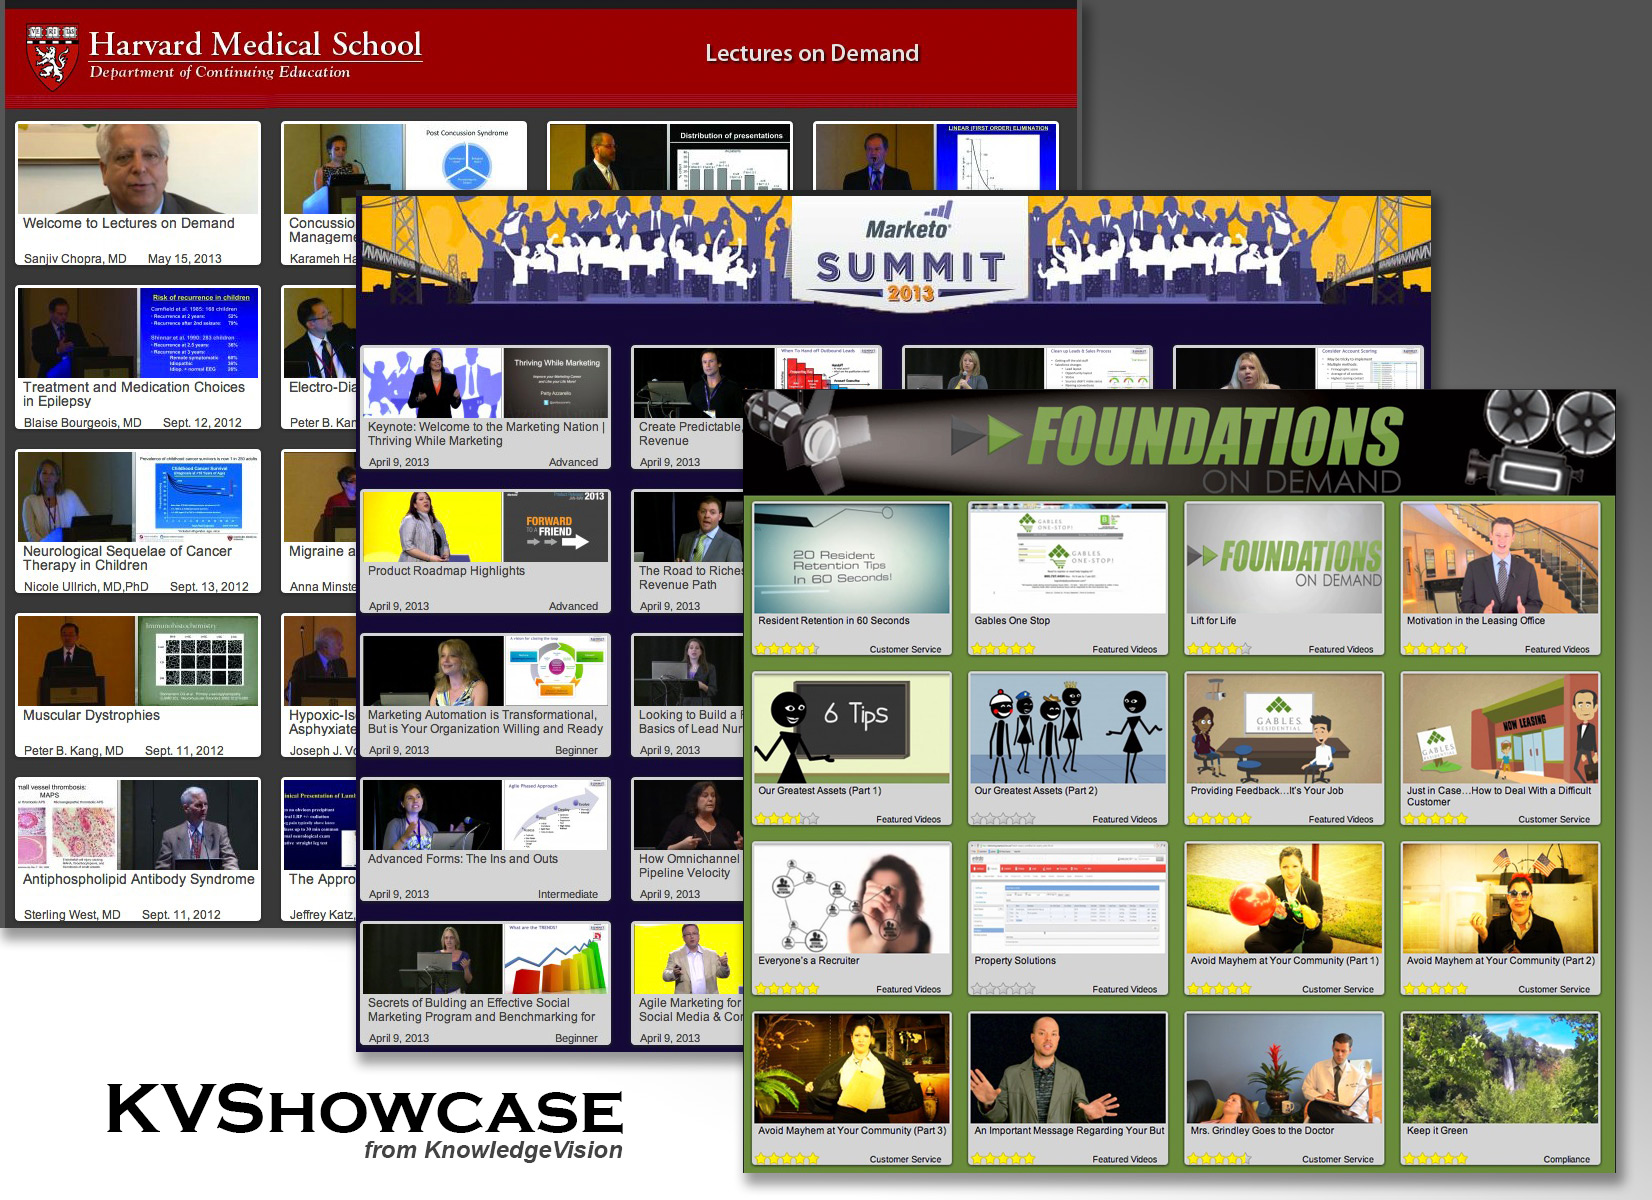 KVShowcase galleries are an attractive way to display, find, and view online presentations in a variety of application areas, from events to corporate learning.